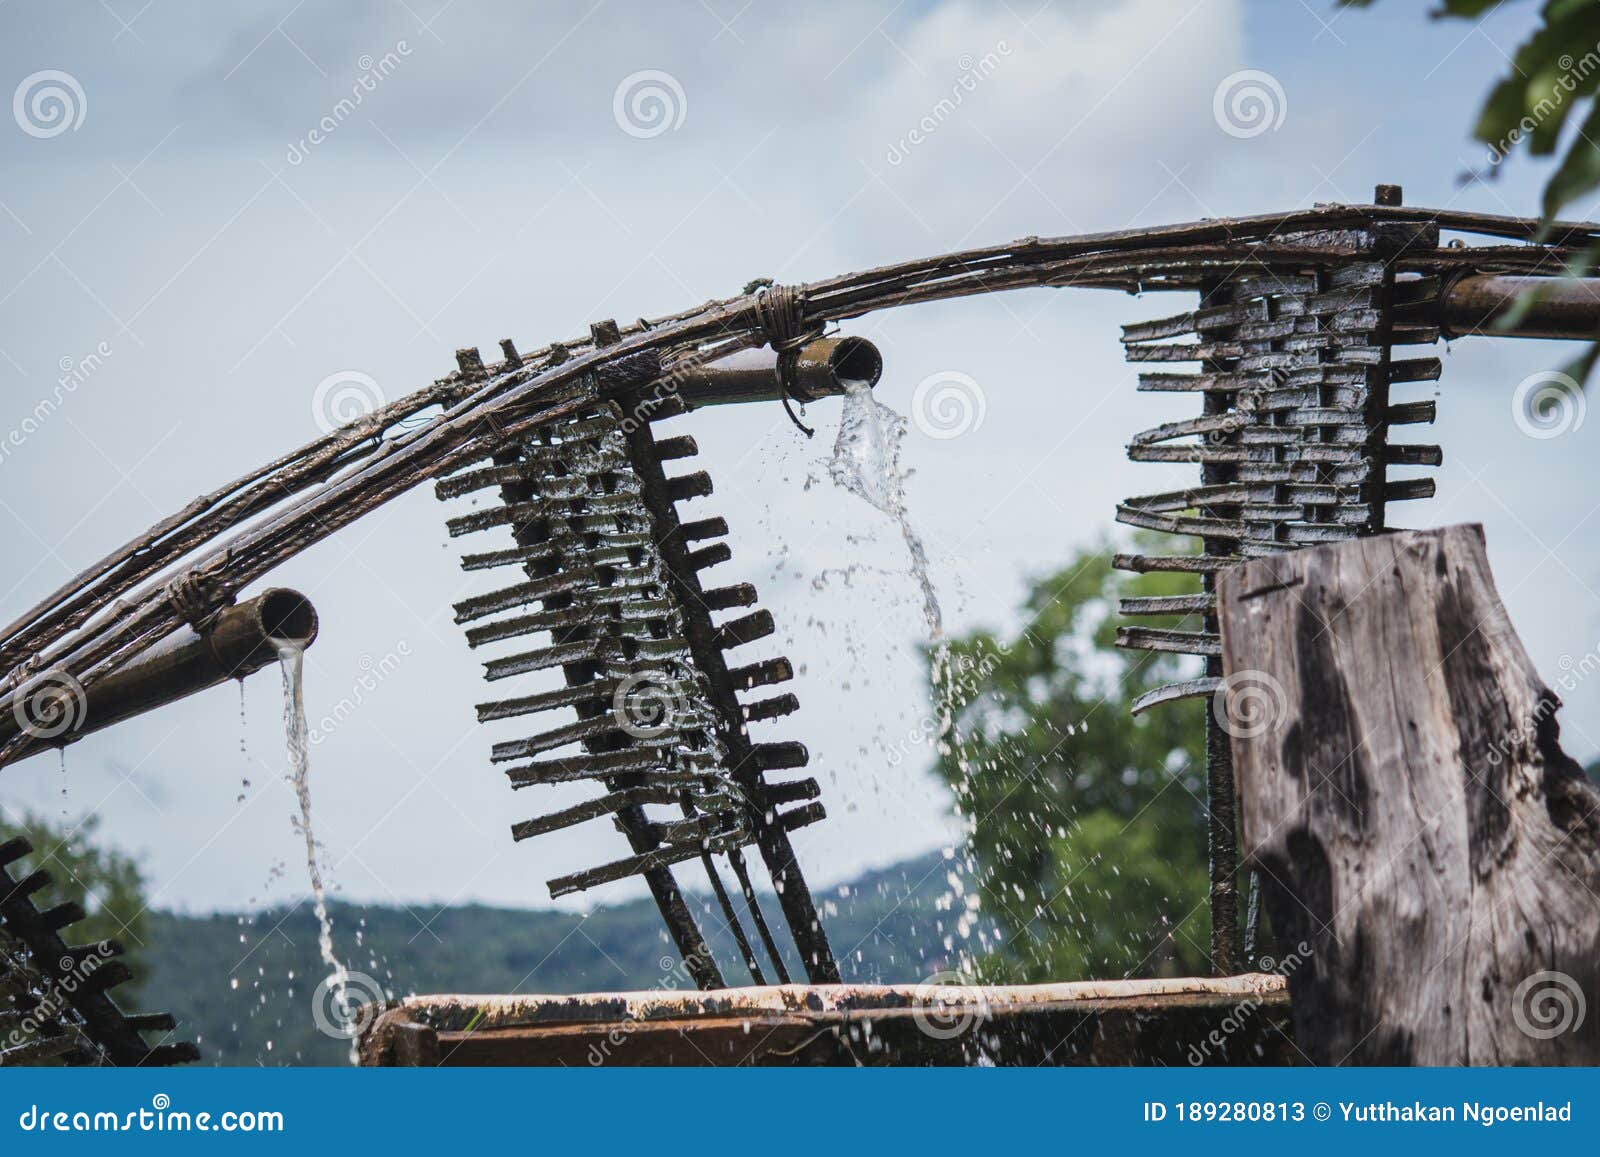 blows irrigation, wood machinery that can divert water from low to high places without using oil. the wisdom of the local people t